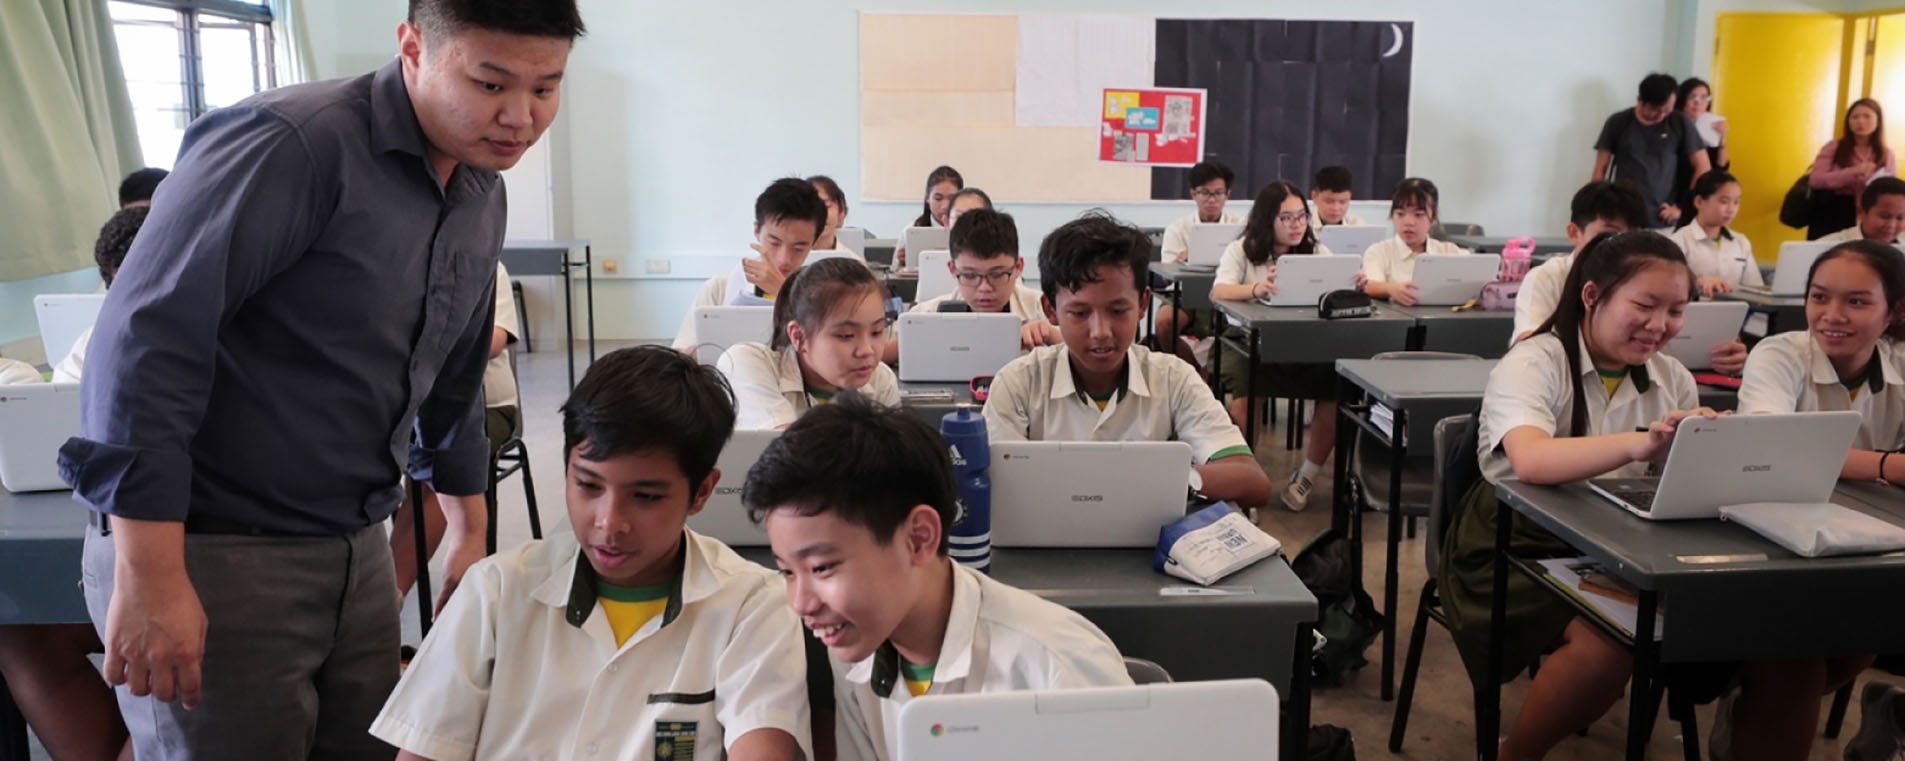 Smart technologies are being adopted to improve many aspects of daily life, including education. Photo source: The Straits Times 